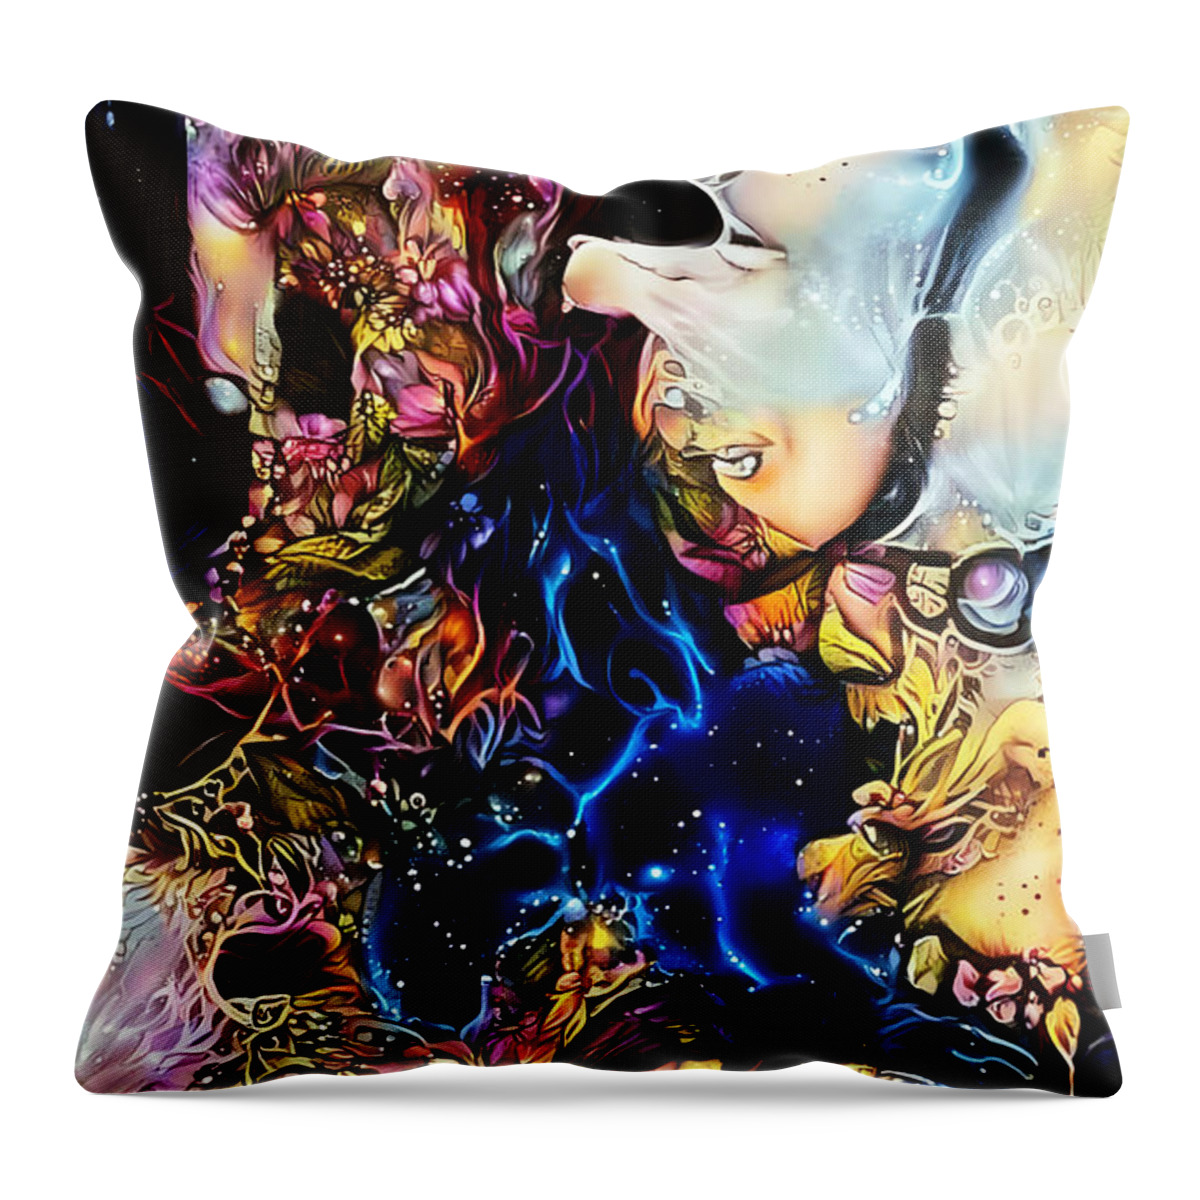 Contemporary Art Throw Pillow featuring the digital art 5 by Jeremiah Ray